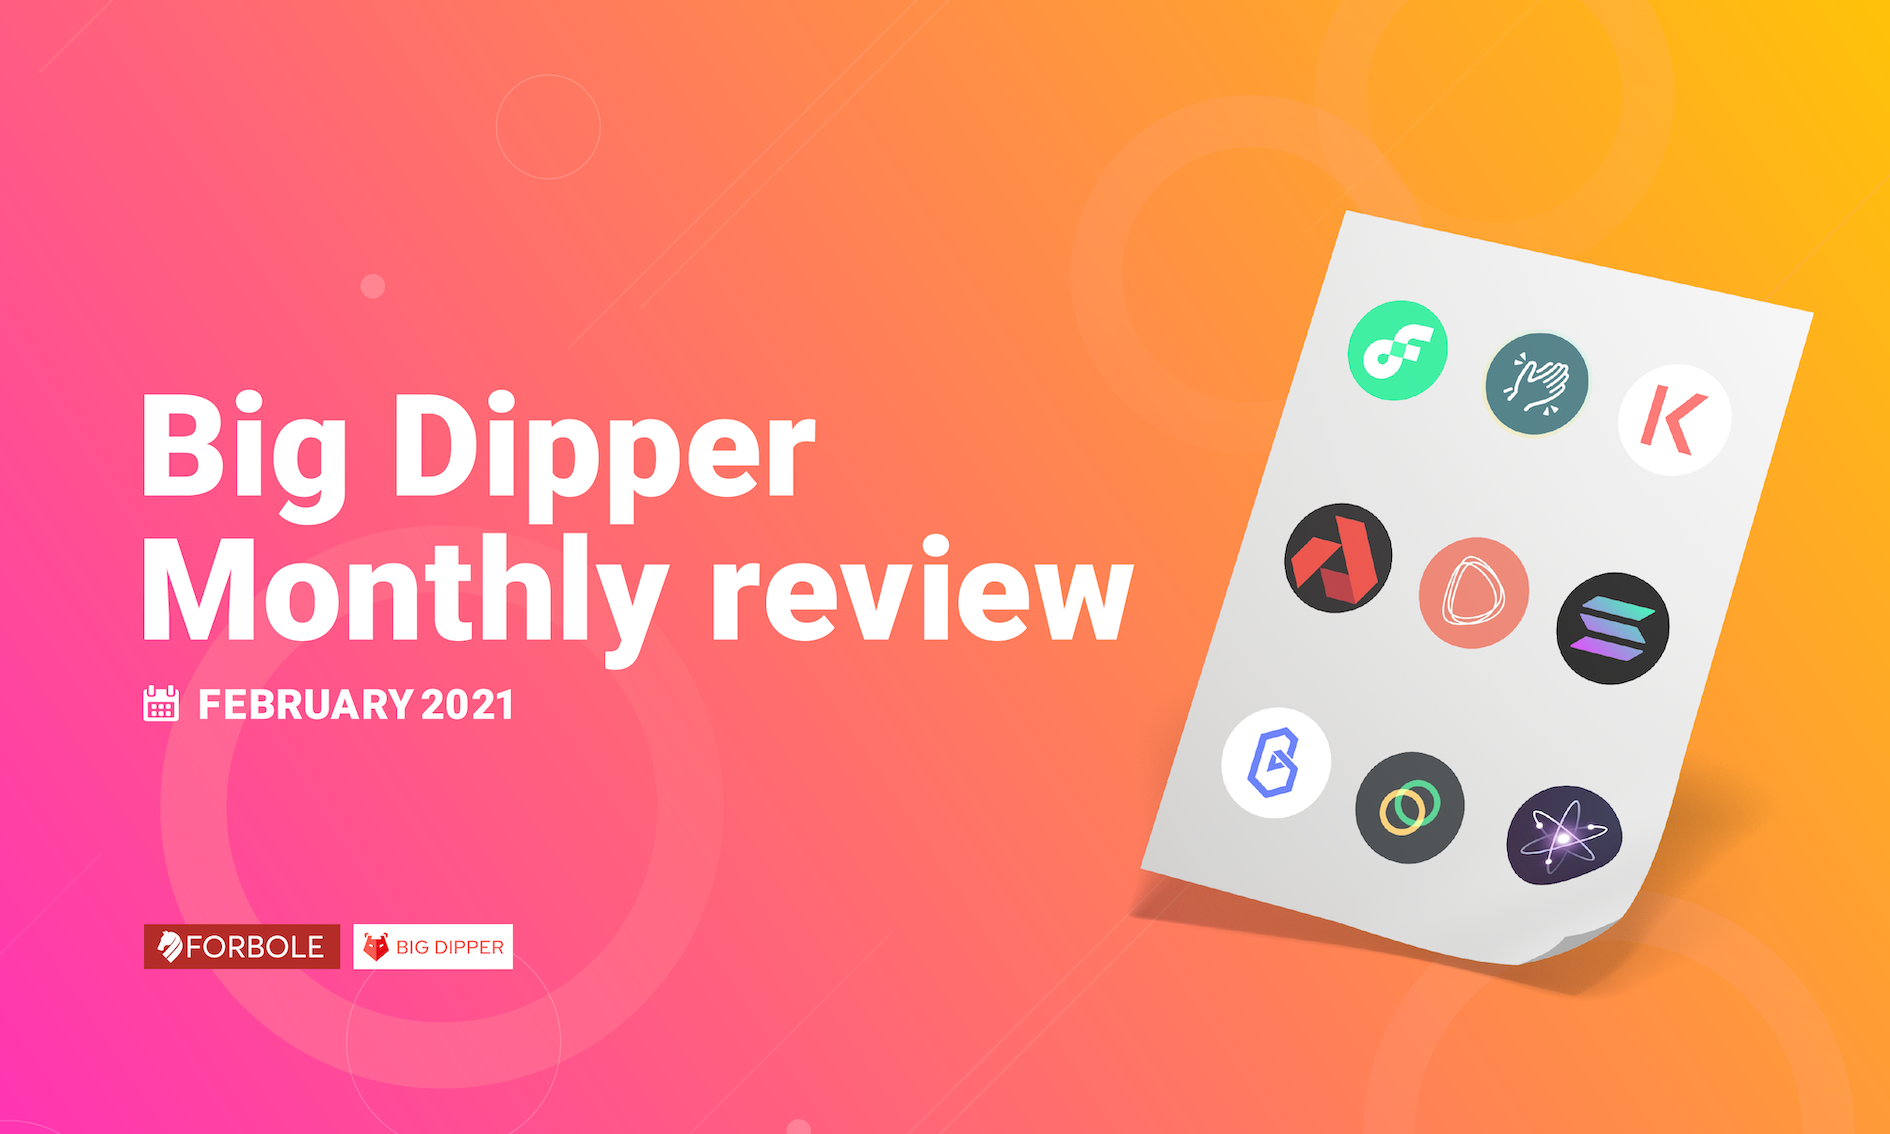 Big Dipper Monthly Review - 
February 2021